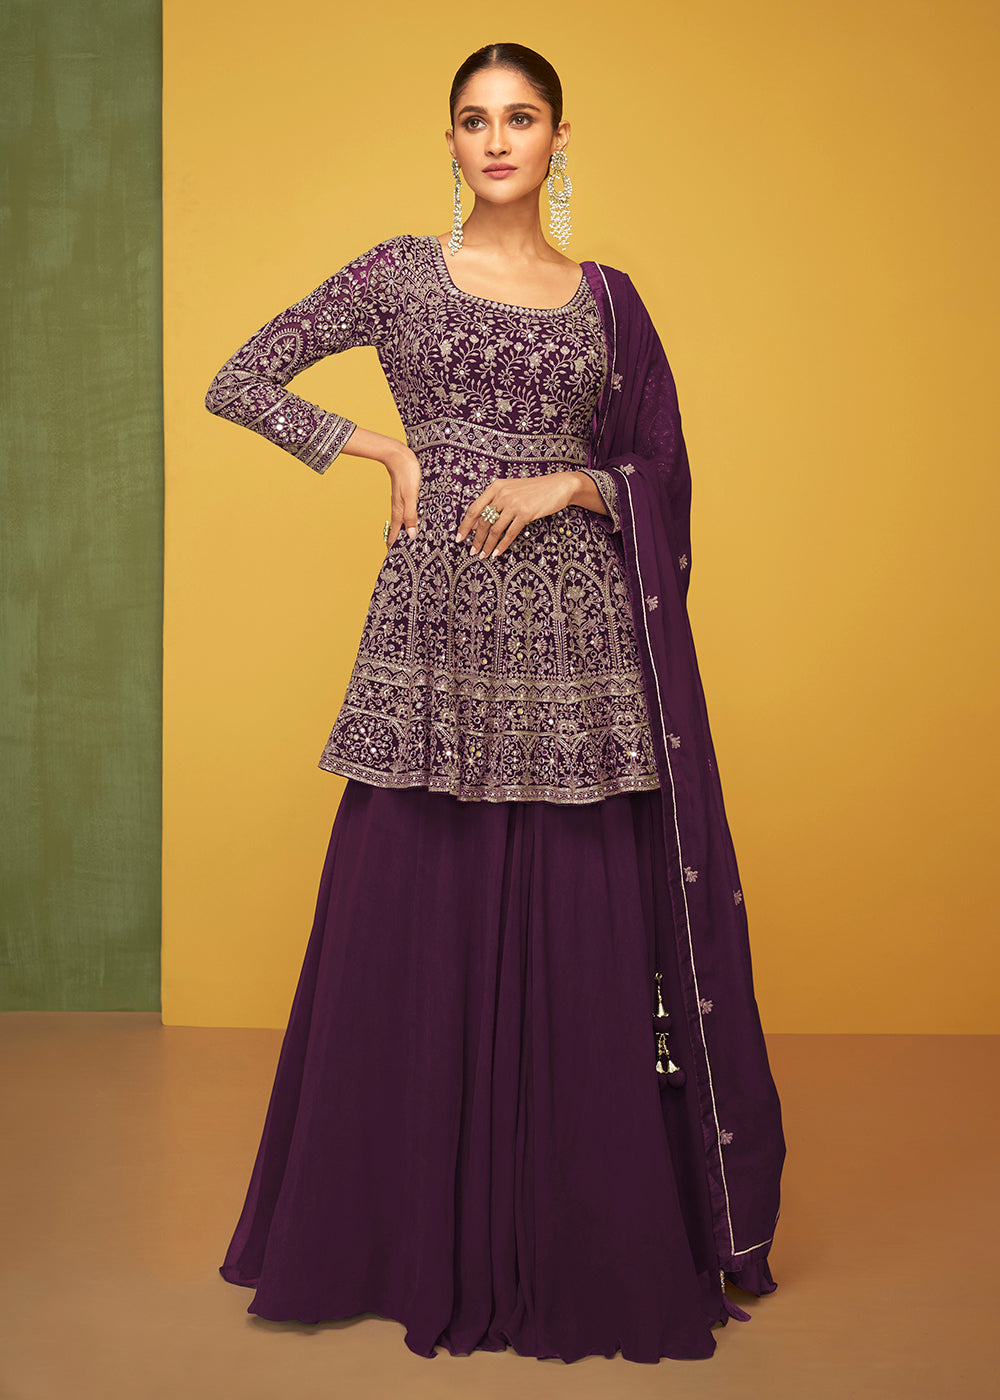 Buy Now Glorious Purple Georgette Fabric Skirt Style Designer Palazzo Suit Online in USA, UK, Canada & Worldwide at Empress Clothing. 